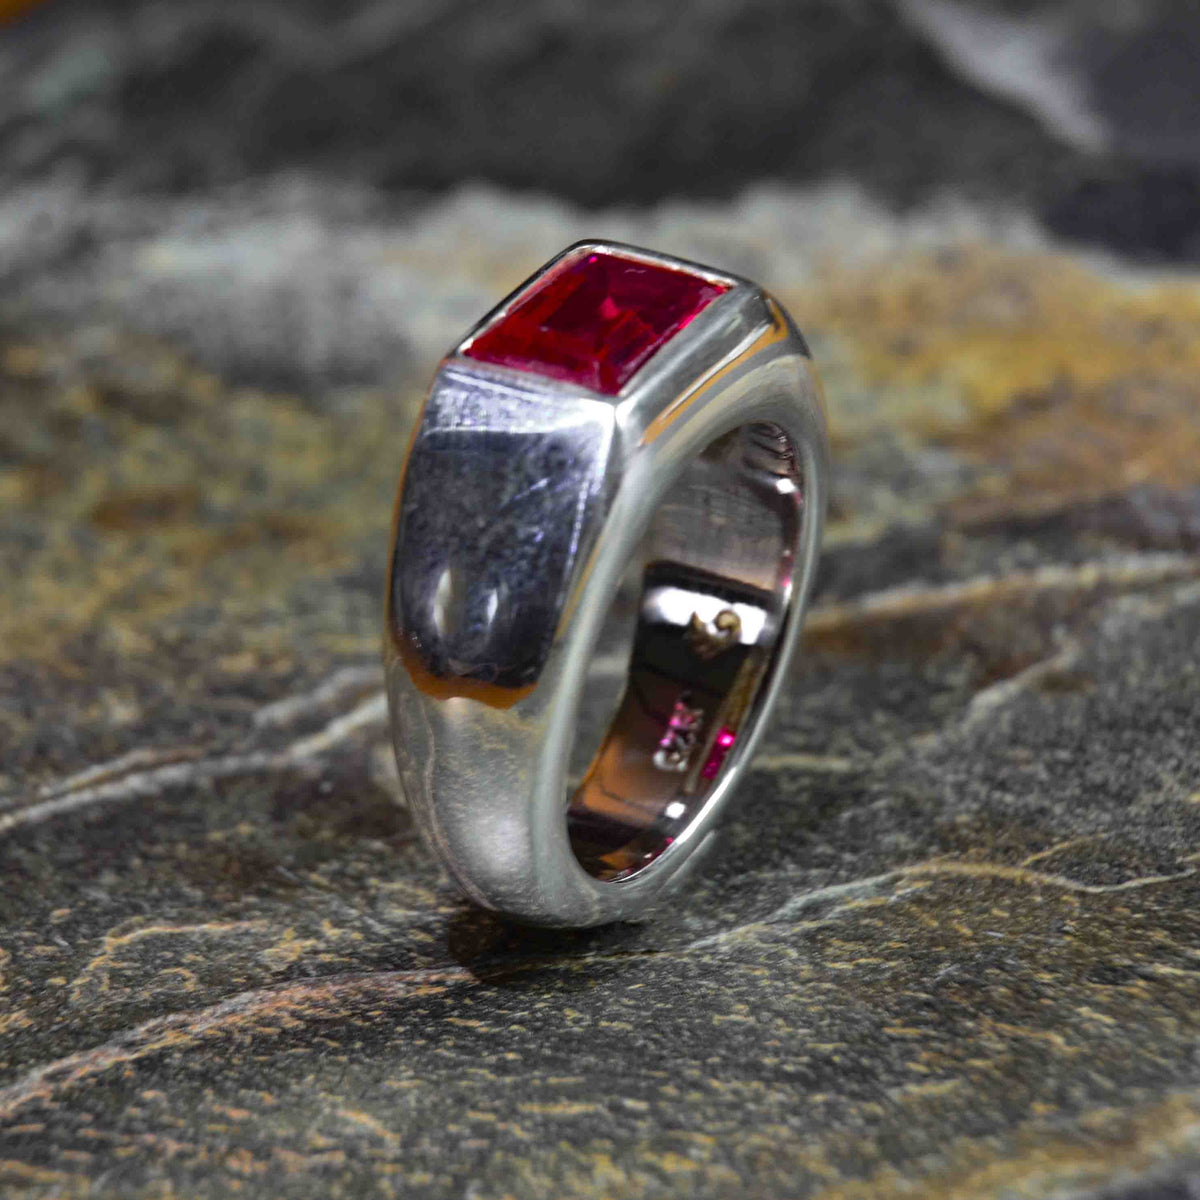 Ruby Silver Ring is a Thick and Bold Silver with a Beautiful Bright Ruby on Top